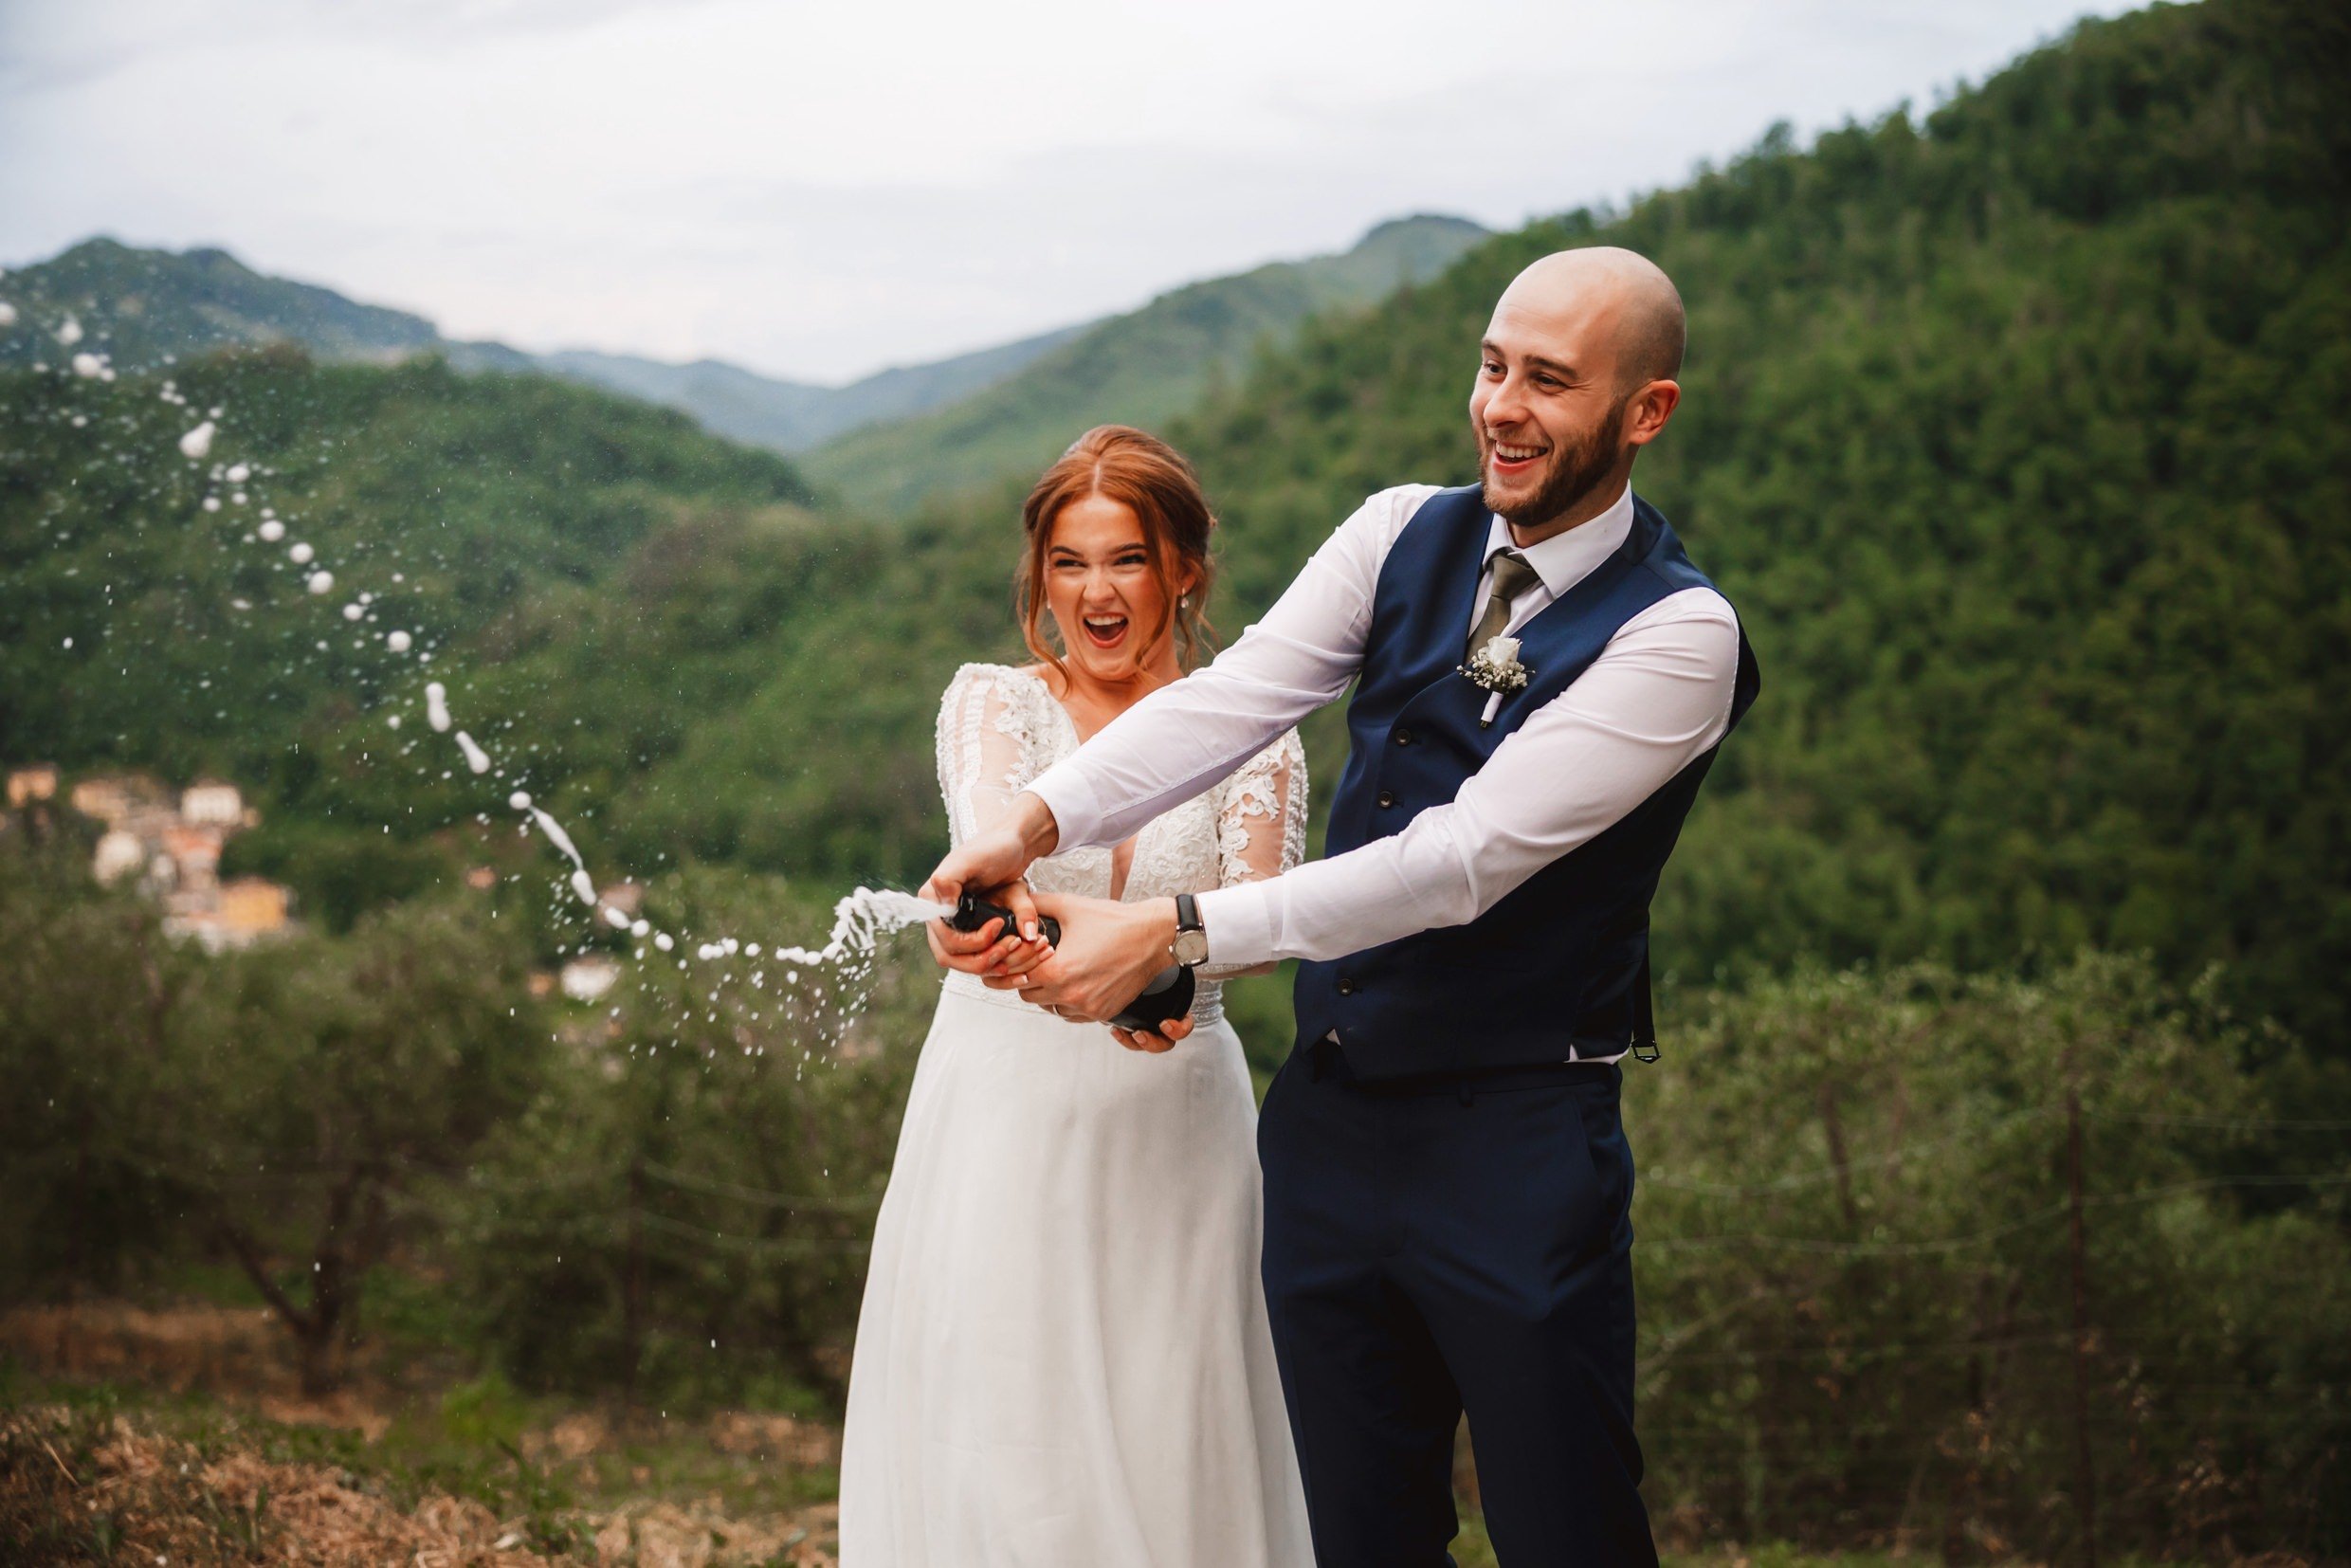 the bride and groom spray champagne with hills and trees in the background at the agriturismo la torre italian destination wedding venue in bagni di lucca tuscany